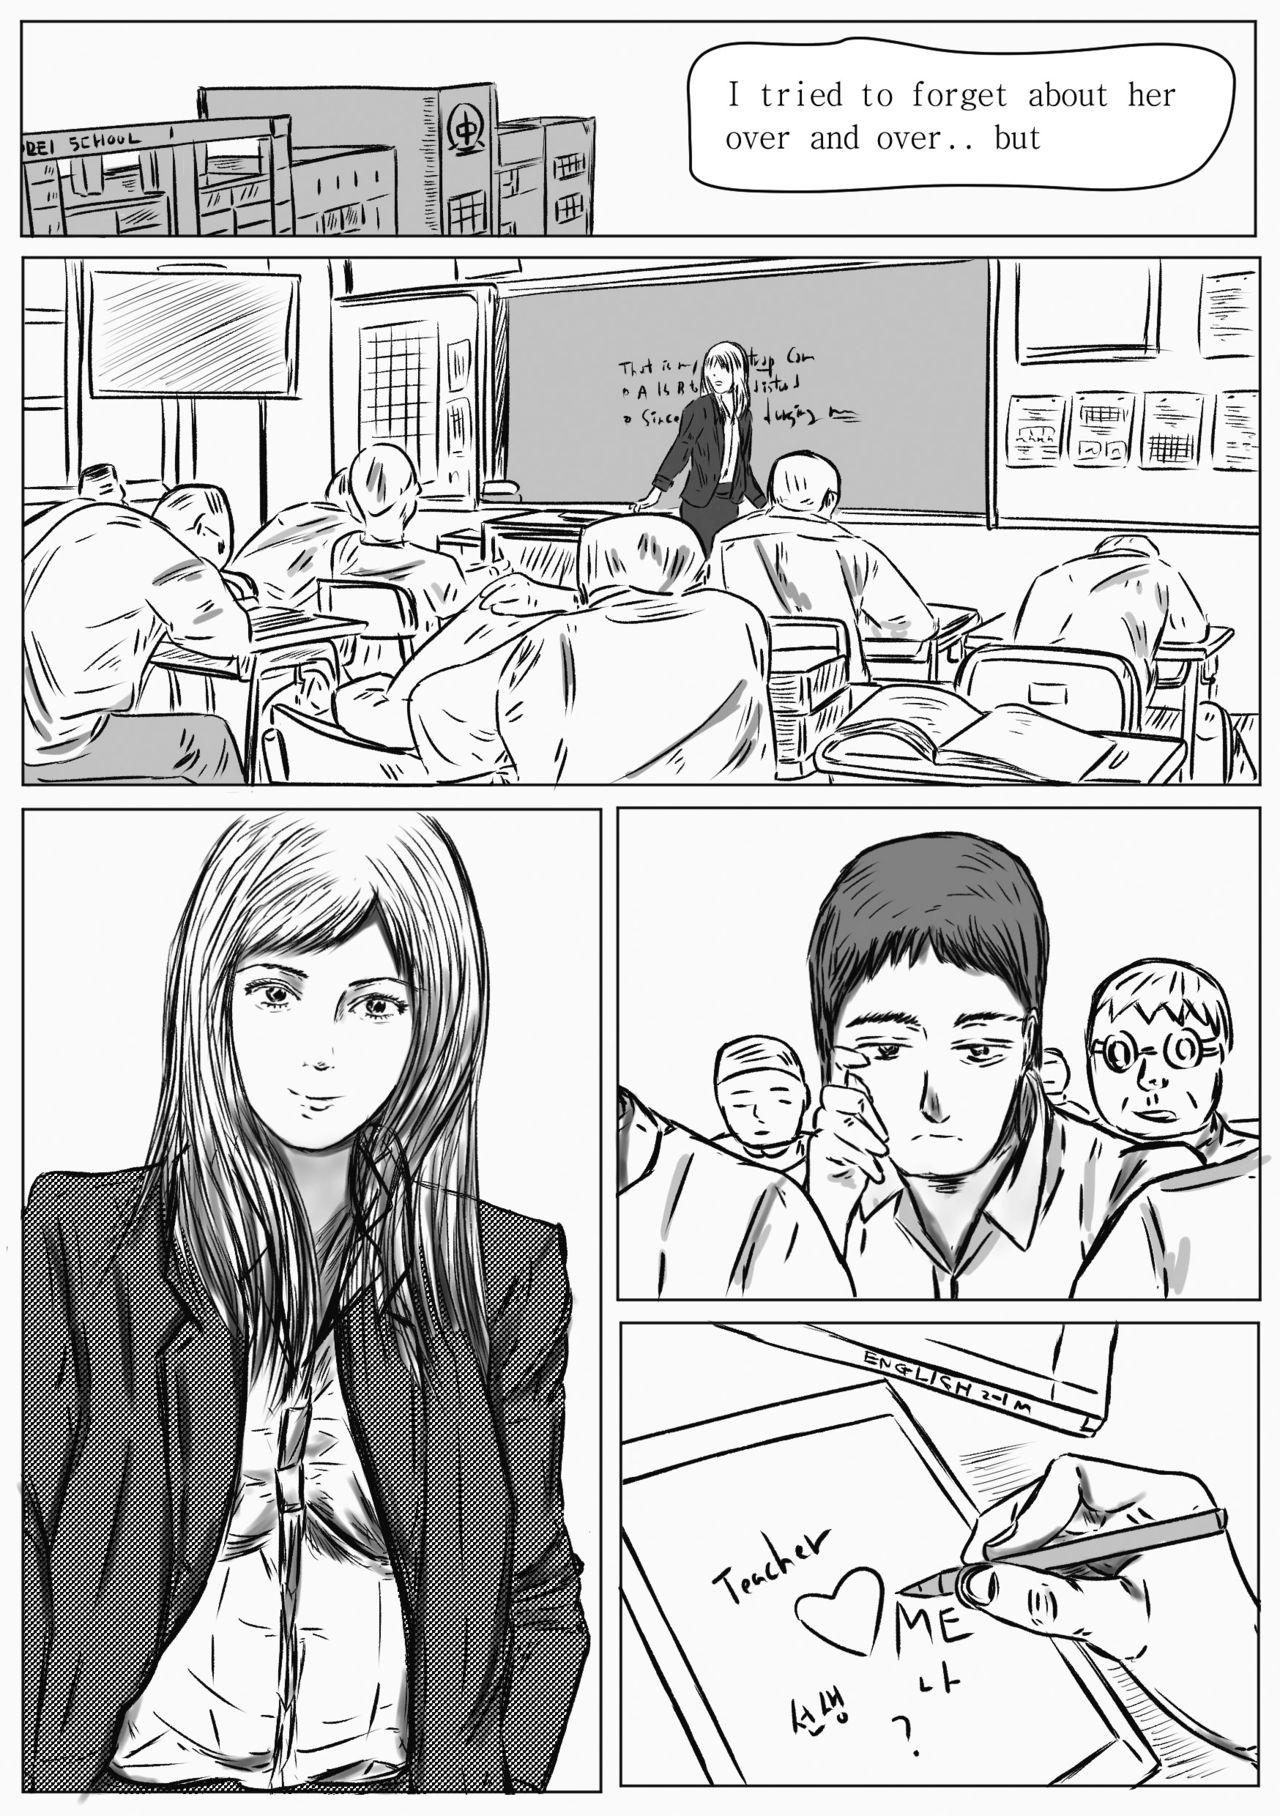 Adorable C. Teacher Is My OWN SLAVE! - Original Stepfamily - Page 4